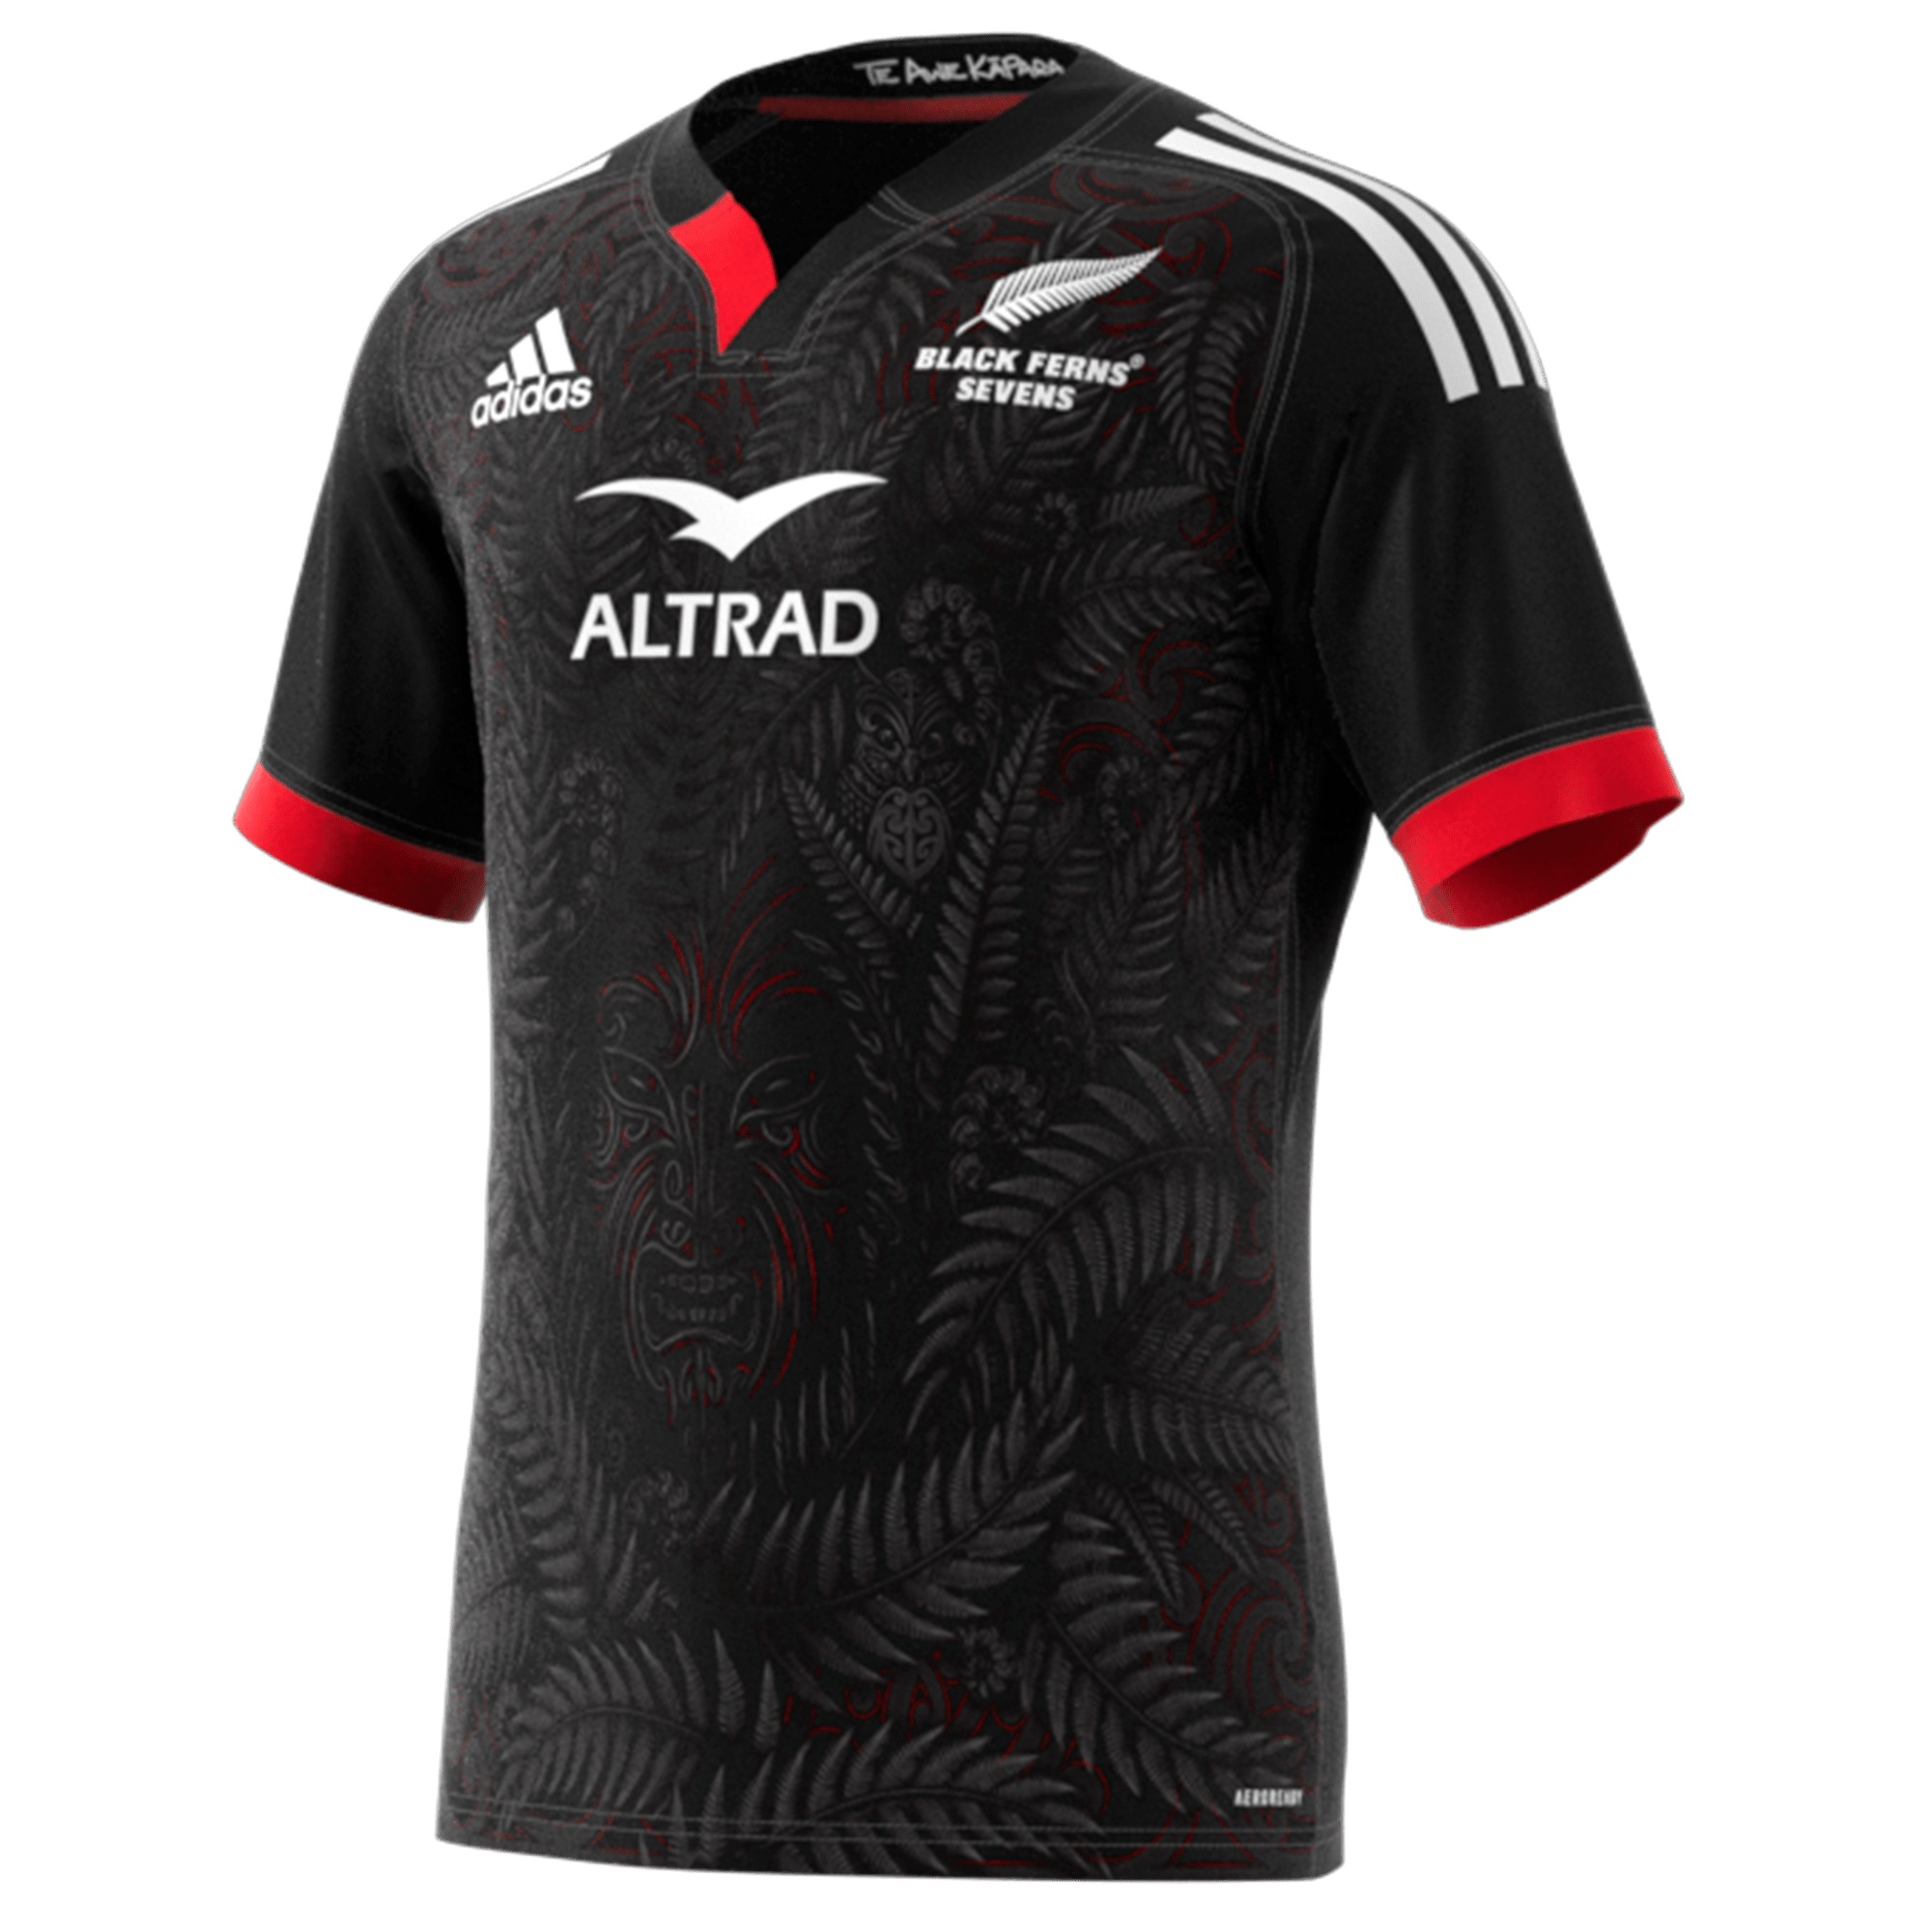 Māori All Blacks Rugby Jersey 22/23 New Zealand Rugby